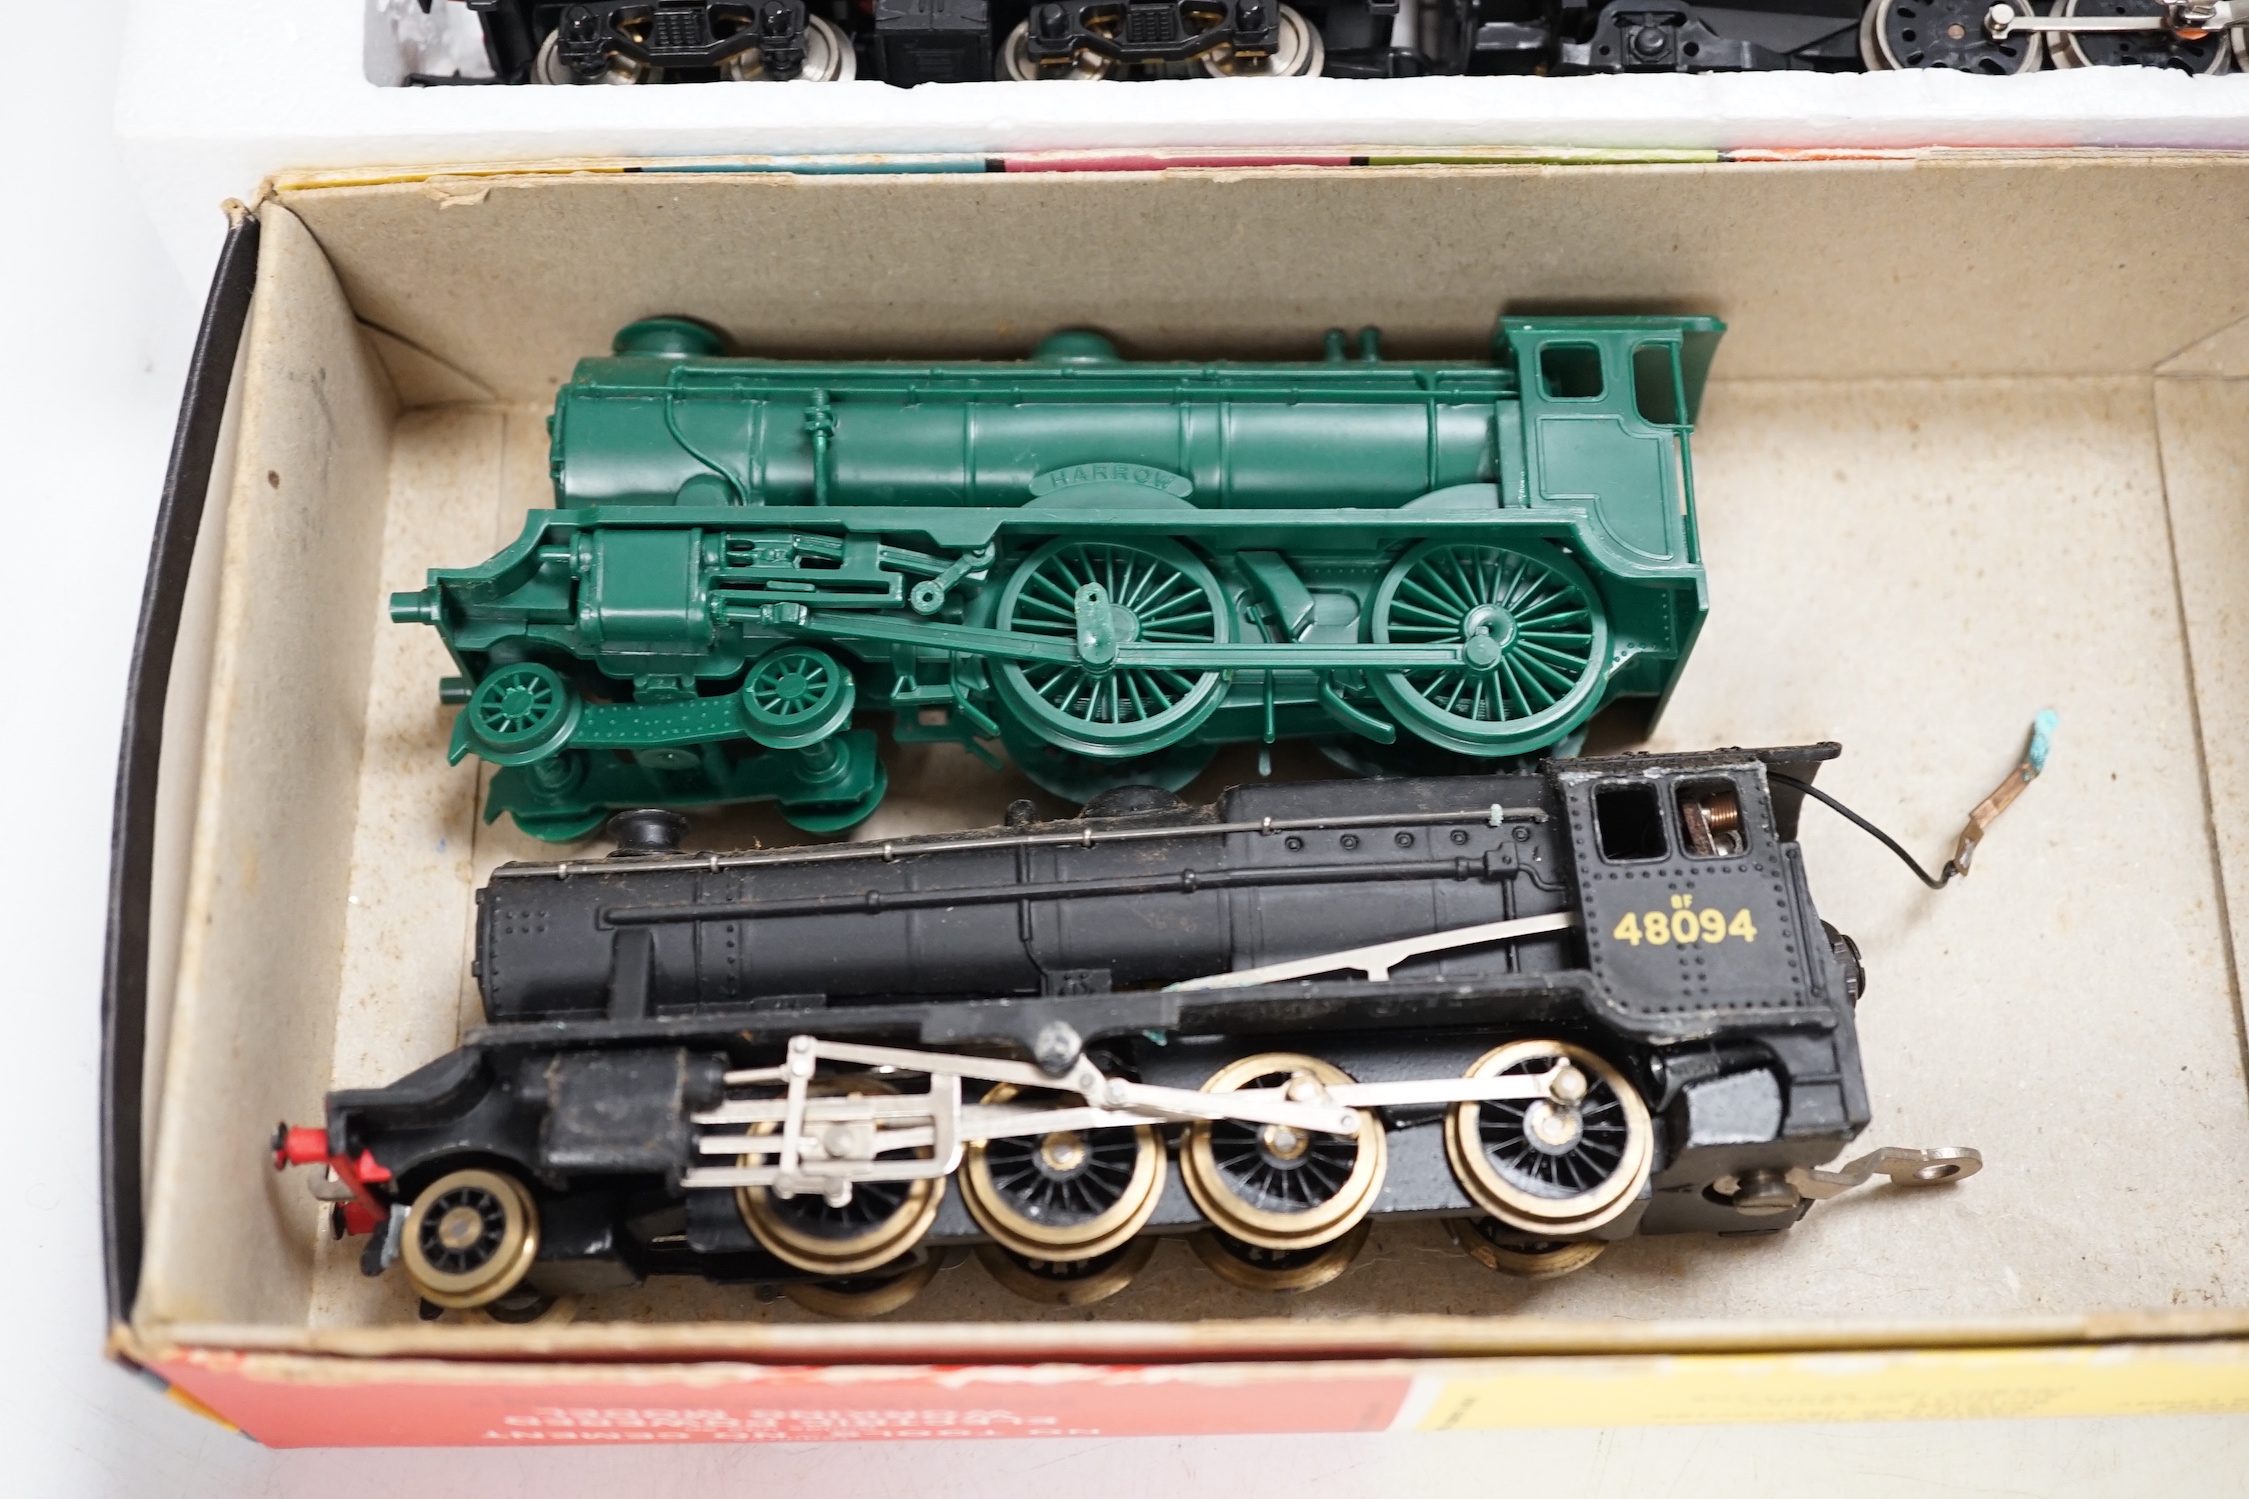 A quantity of 00 and HO gauge model, railway, including; a boxed Jouef SNCF 2–8–2, tender locomotive (8272), a Jouef SNCF clockwork train set, a Tri-ang Class L1 4-4-0 loco, (tender missing), an empty box for Hornby Dubl